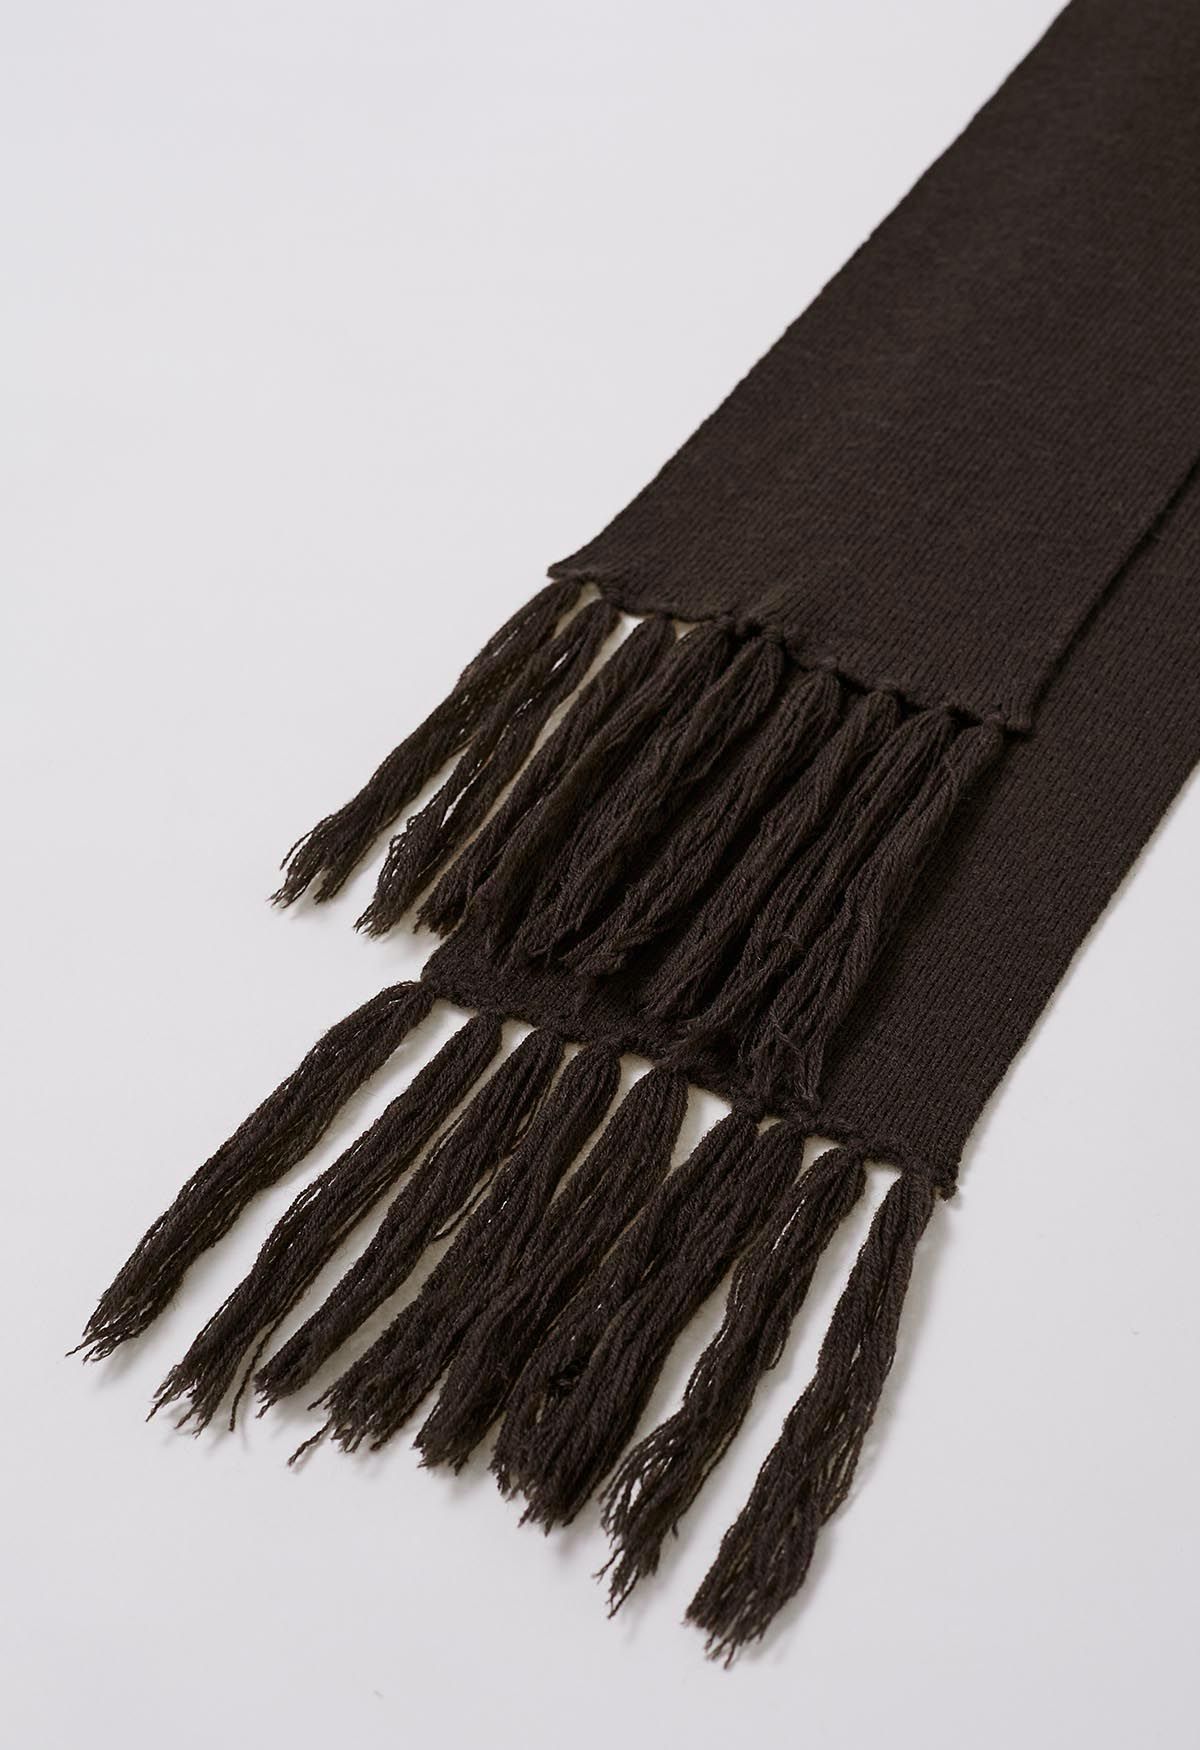 Asymmetric Ribbed Knit Sweater with Tassel Scarf in Brown